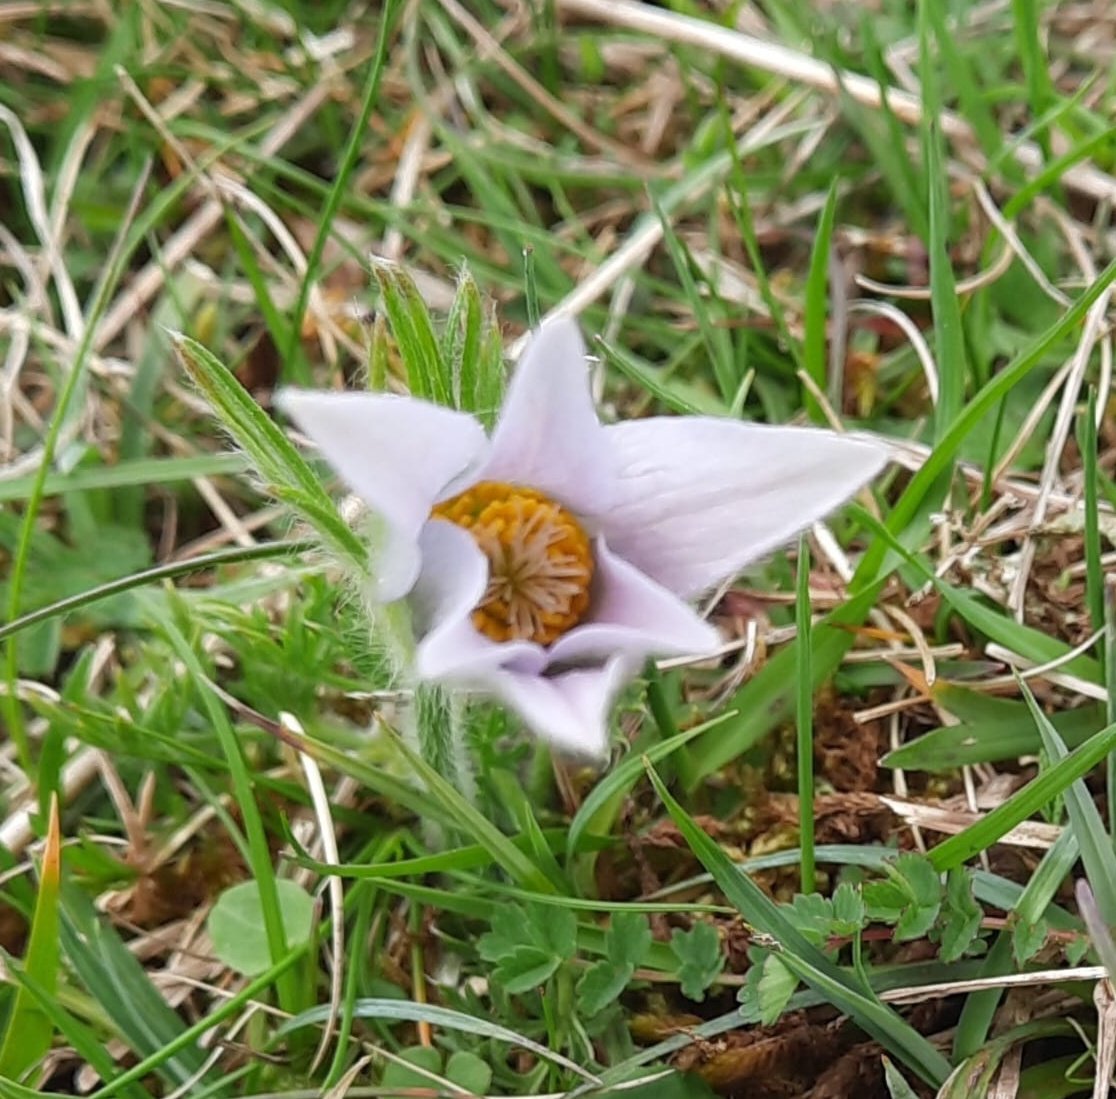 Apparently I went our to see a now-rare bloom on #InternationalPlantAppreciationDay! The Warren, a #Gloucestershire bastion of the pasque flower (Pulsatilla vulgaris) surely delivered the goods, including a lovely pale one among the deep purple. So wonderful! #wildflowers